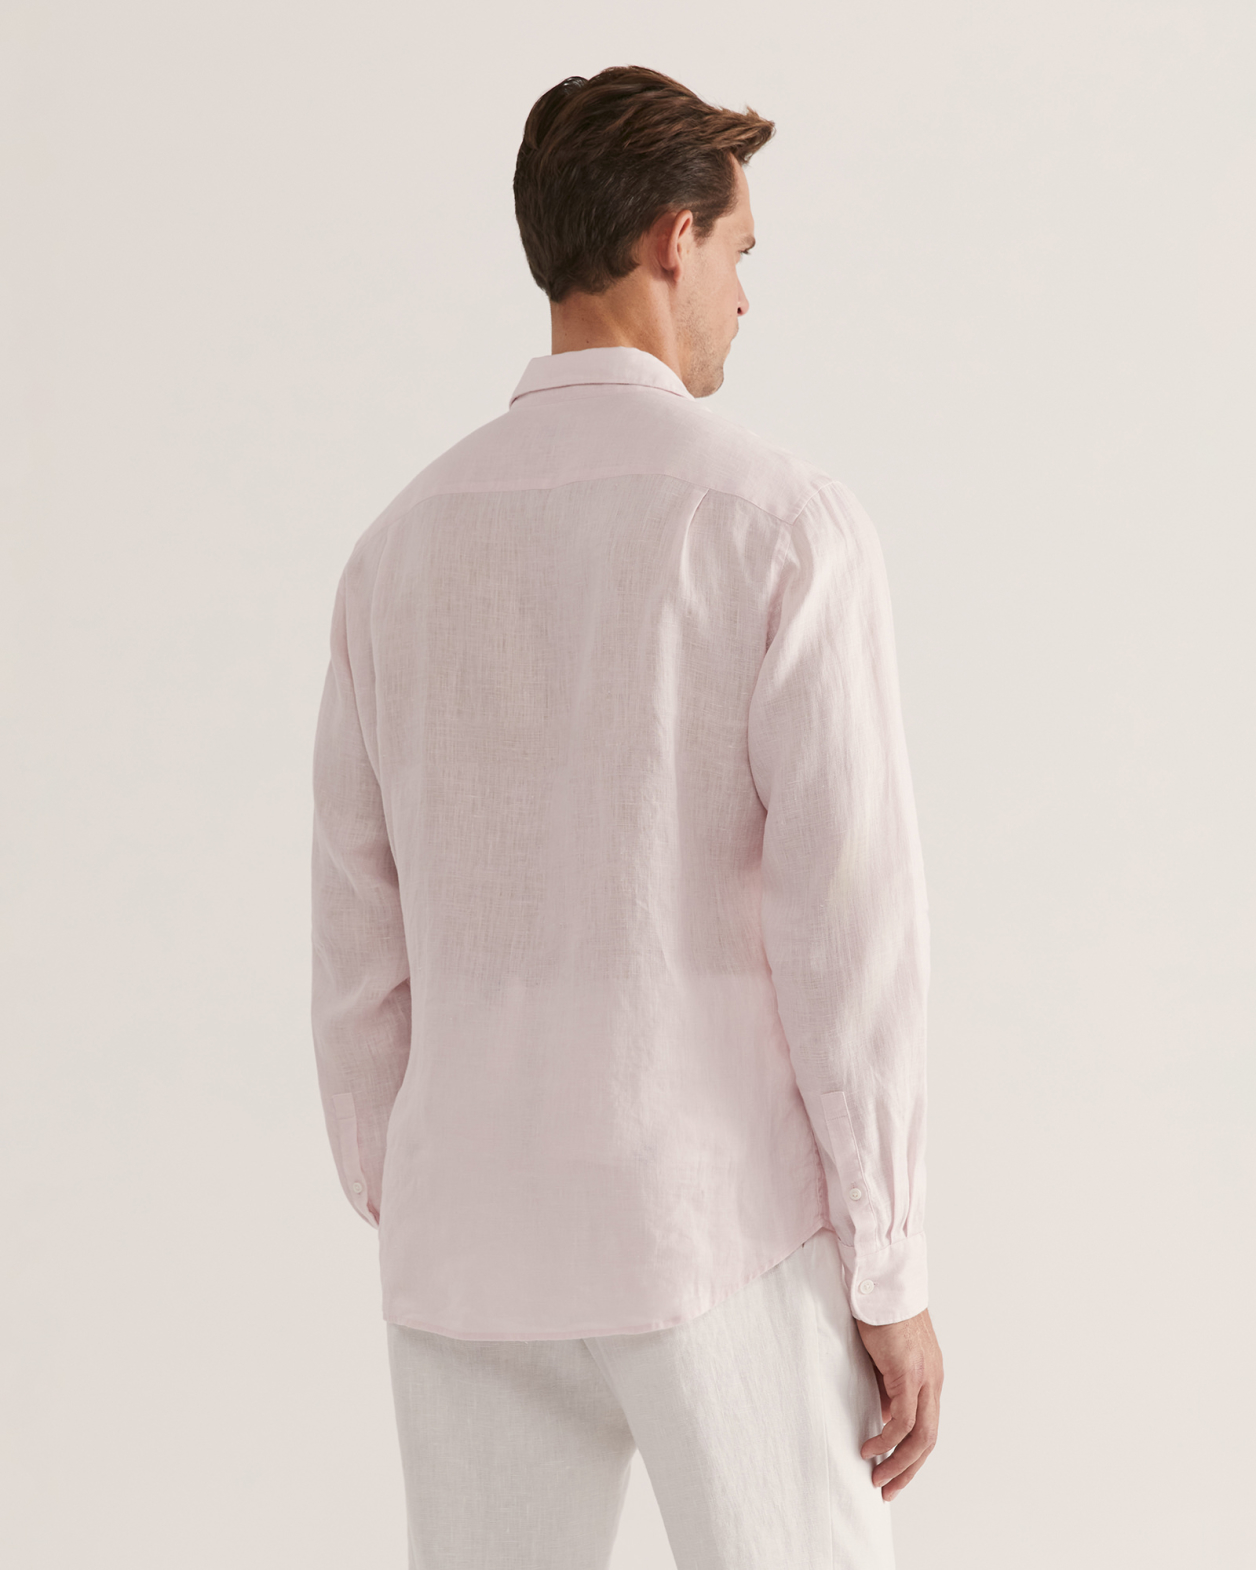 Anderson Long Sleeve Classic Linen Shirt in PINK